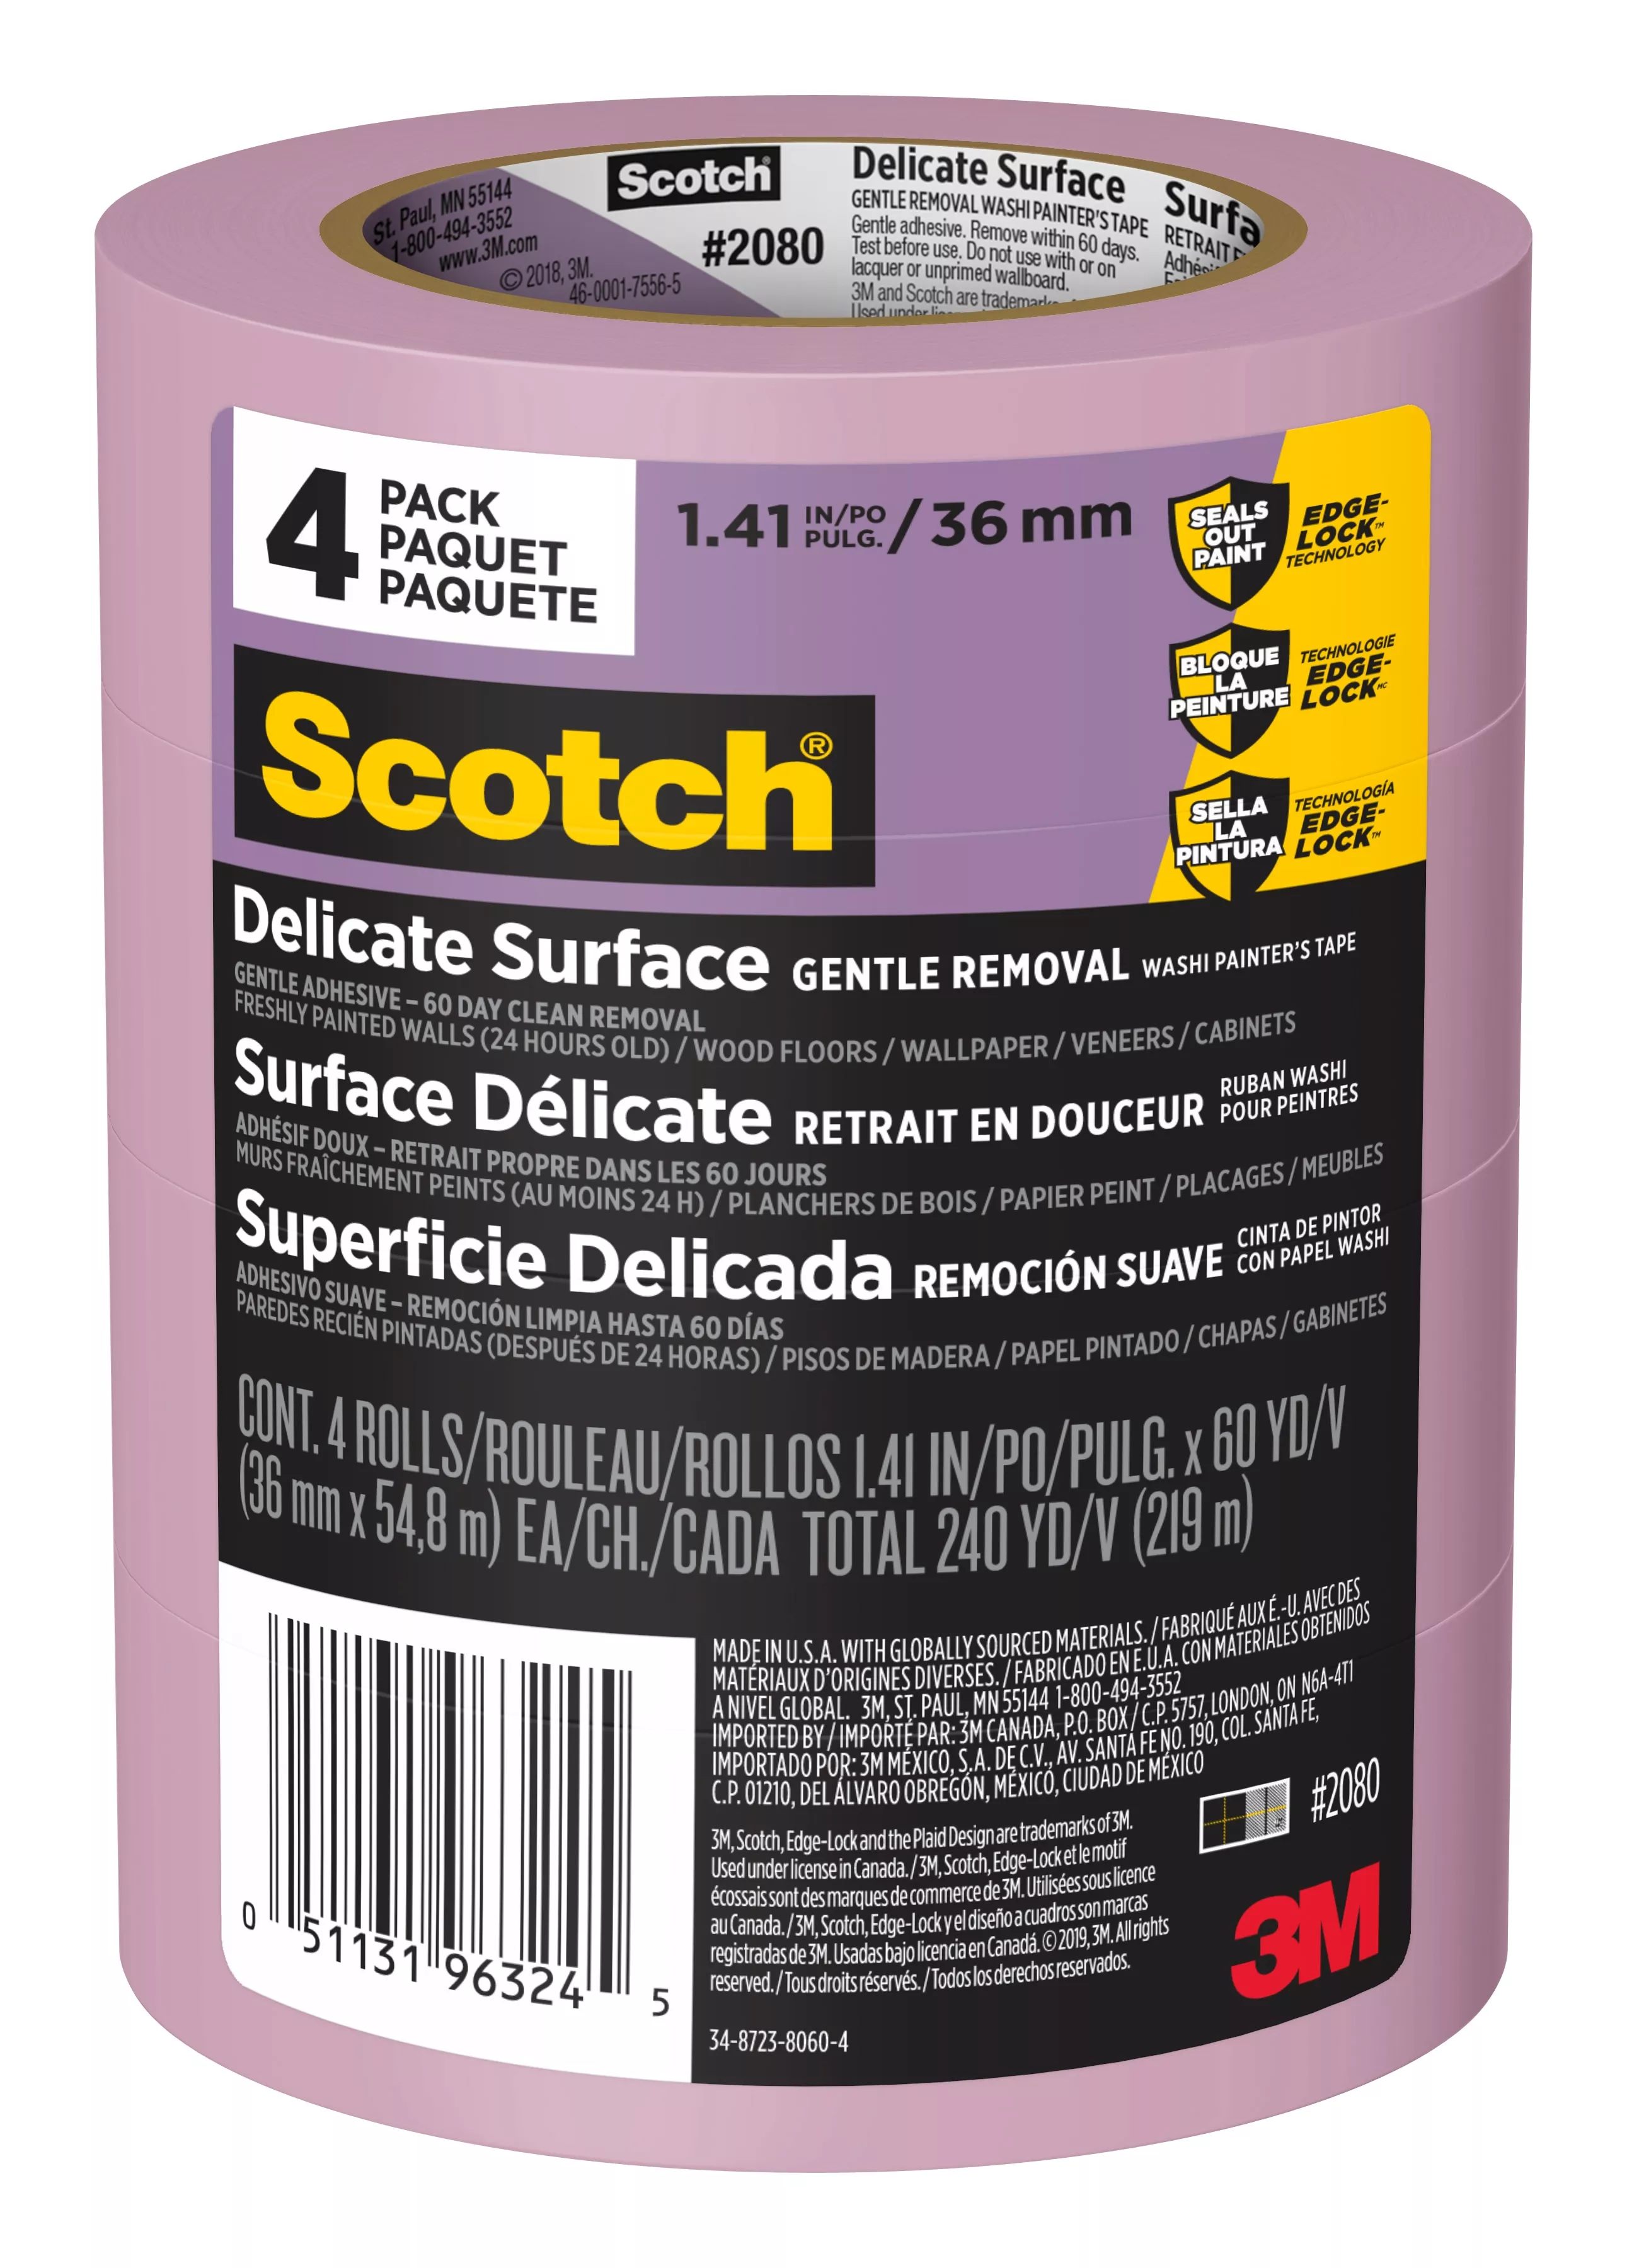 Scotch® Delicate Surface Painter's Tape 2080-36DP4, 1.41 in x 60 yd.
(36mm x 54,8m), 4 rolls/pack